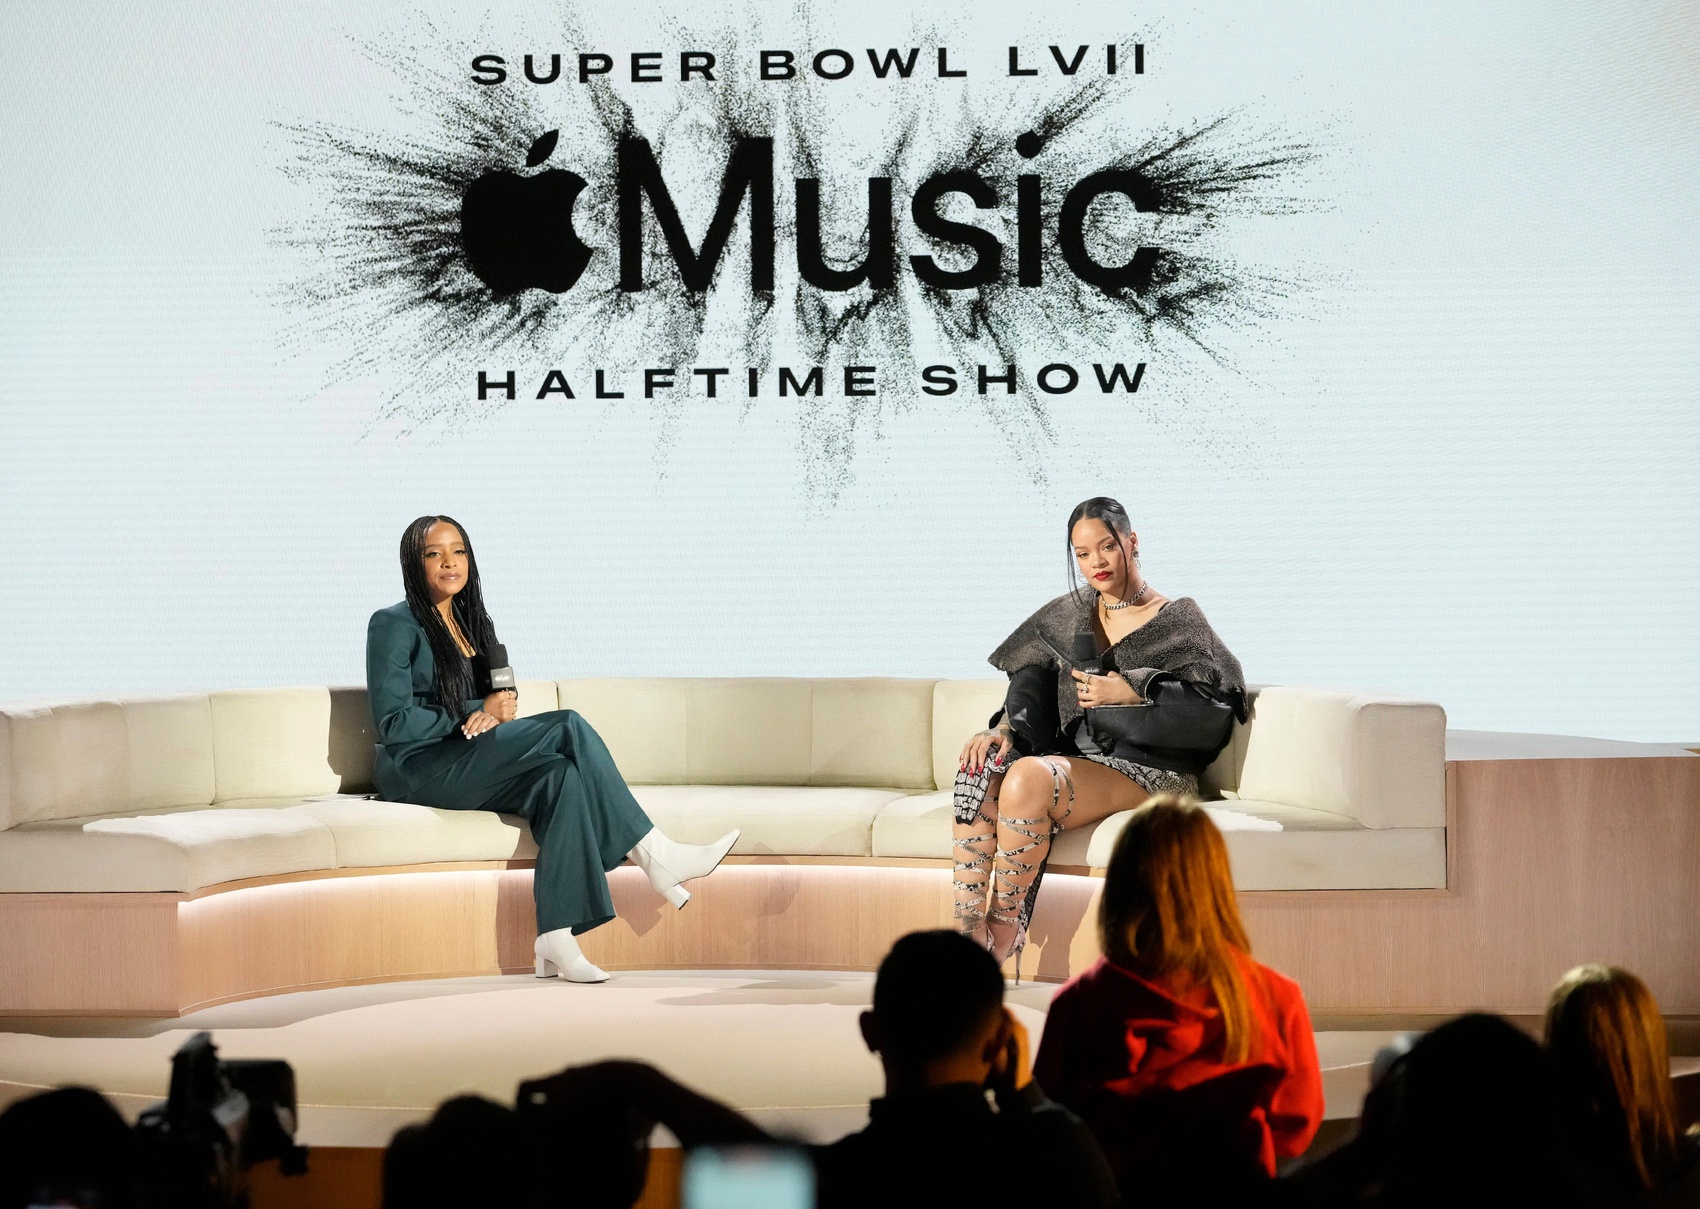 Apple Music Super Bowl LVII Halftime Show talent Rihanna participates in a moderated conversation with Apple Music Radio s Nadeska Alexis during a news conference in Phoenix on Feb. 9, 2023. News Apple Music Super Bowl Halftime Show Press Conference